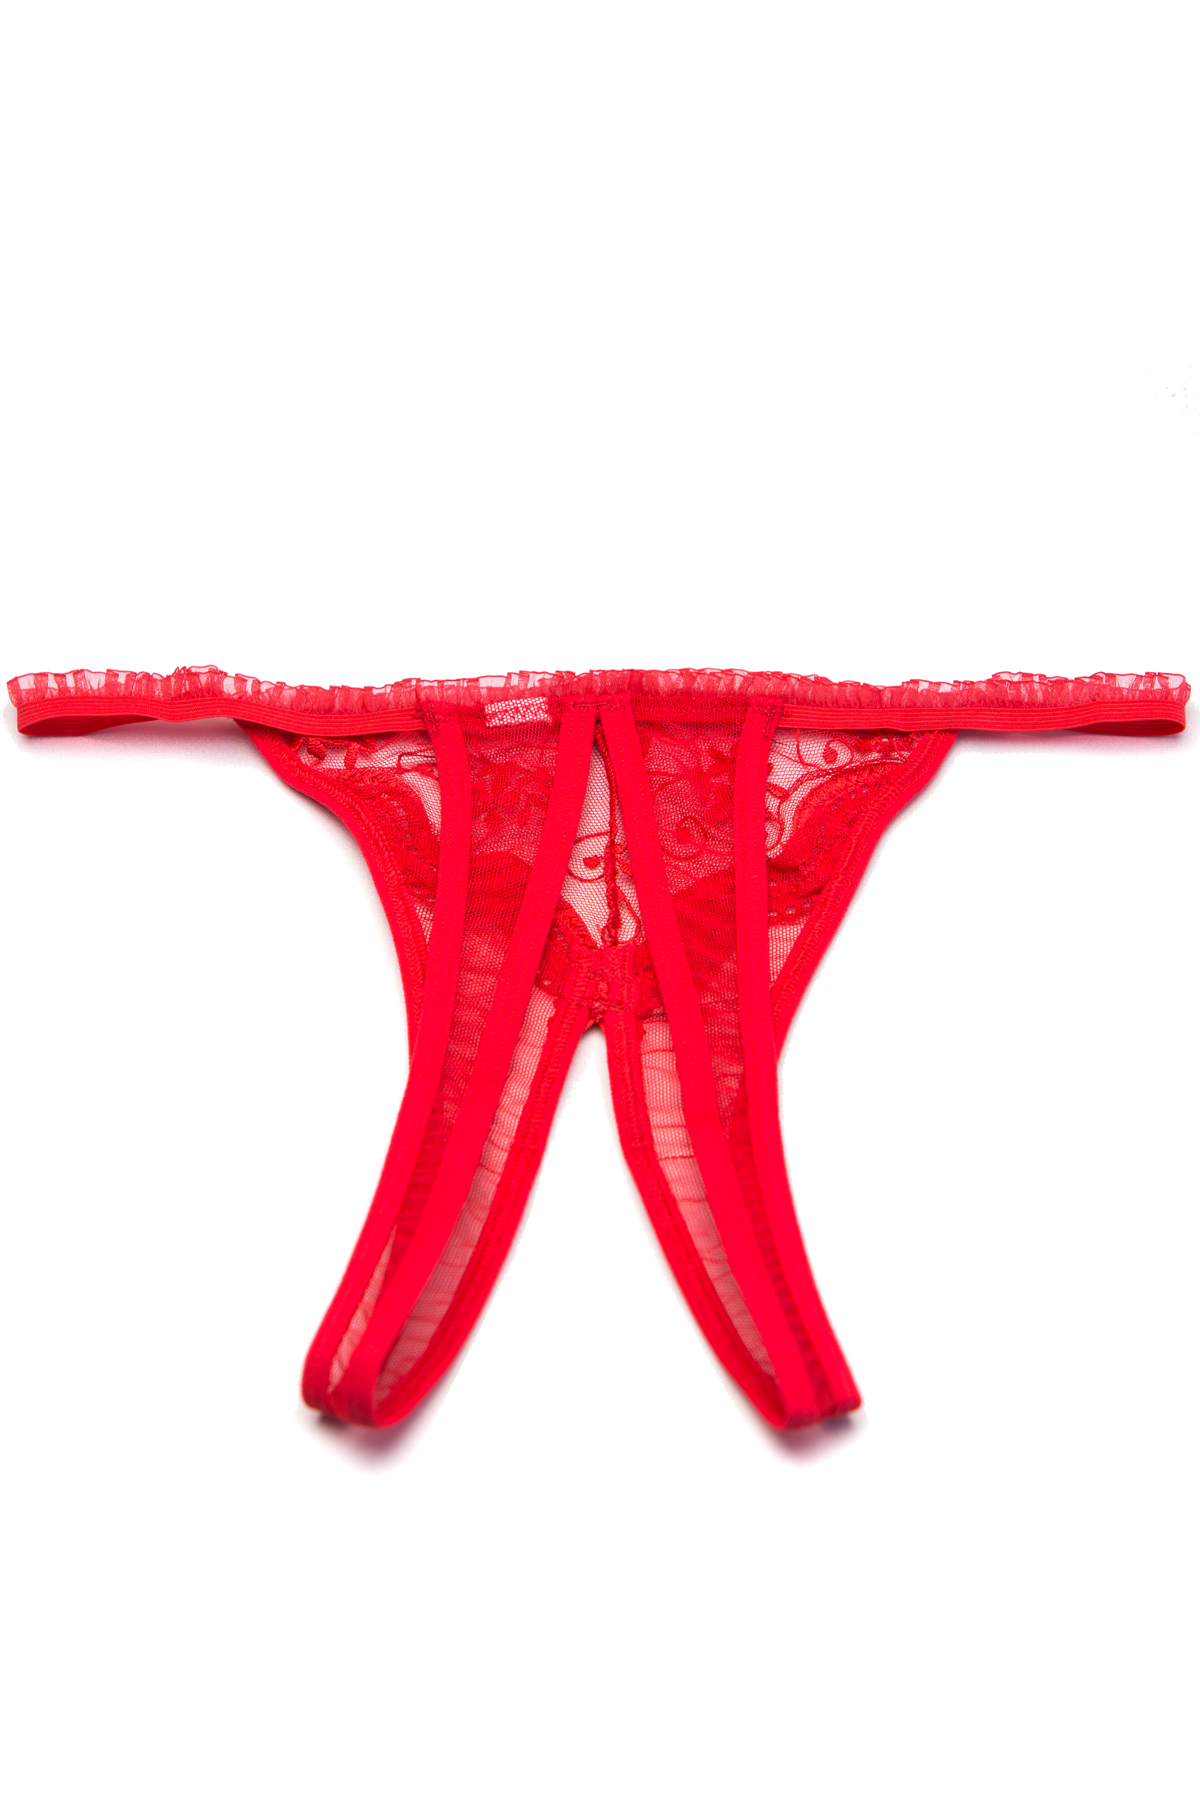 Scalloped Embroidery Crotchless Thong –